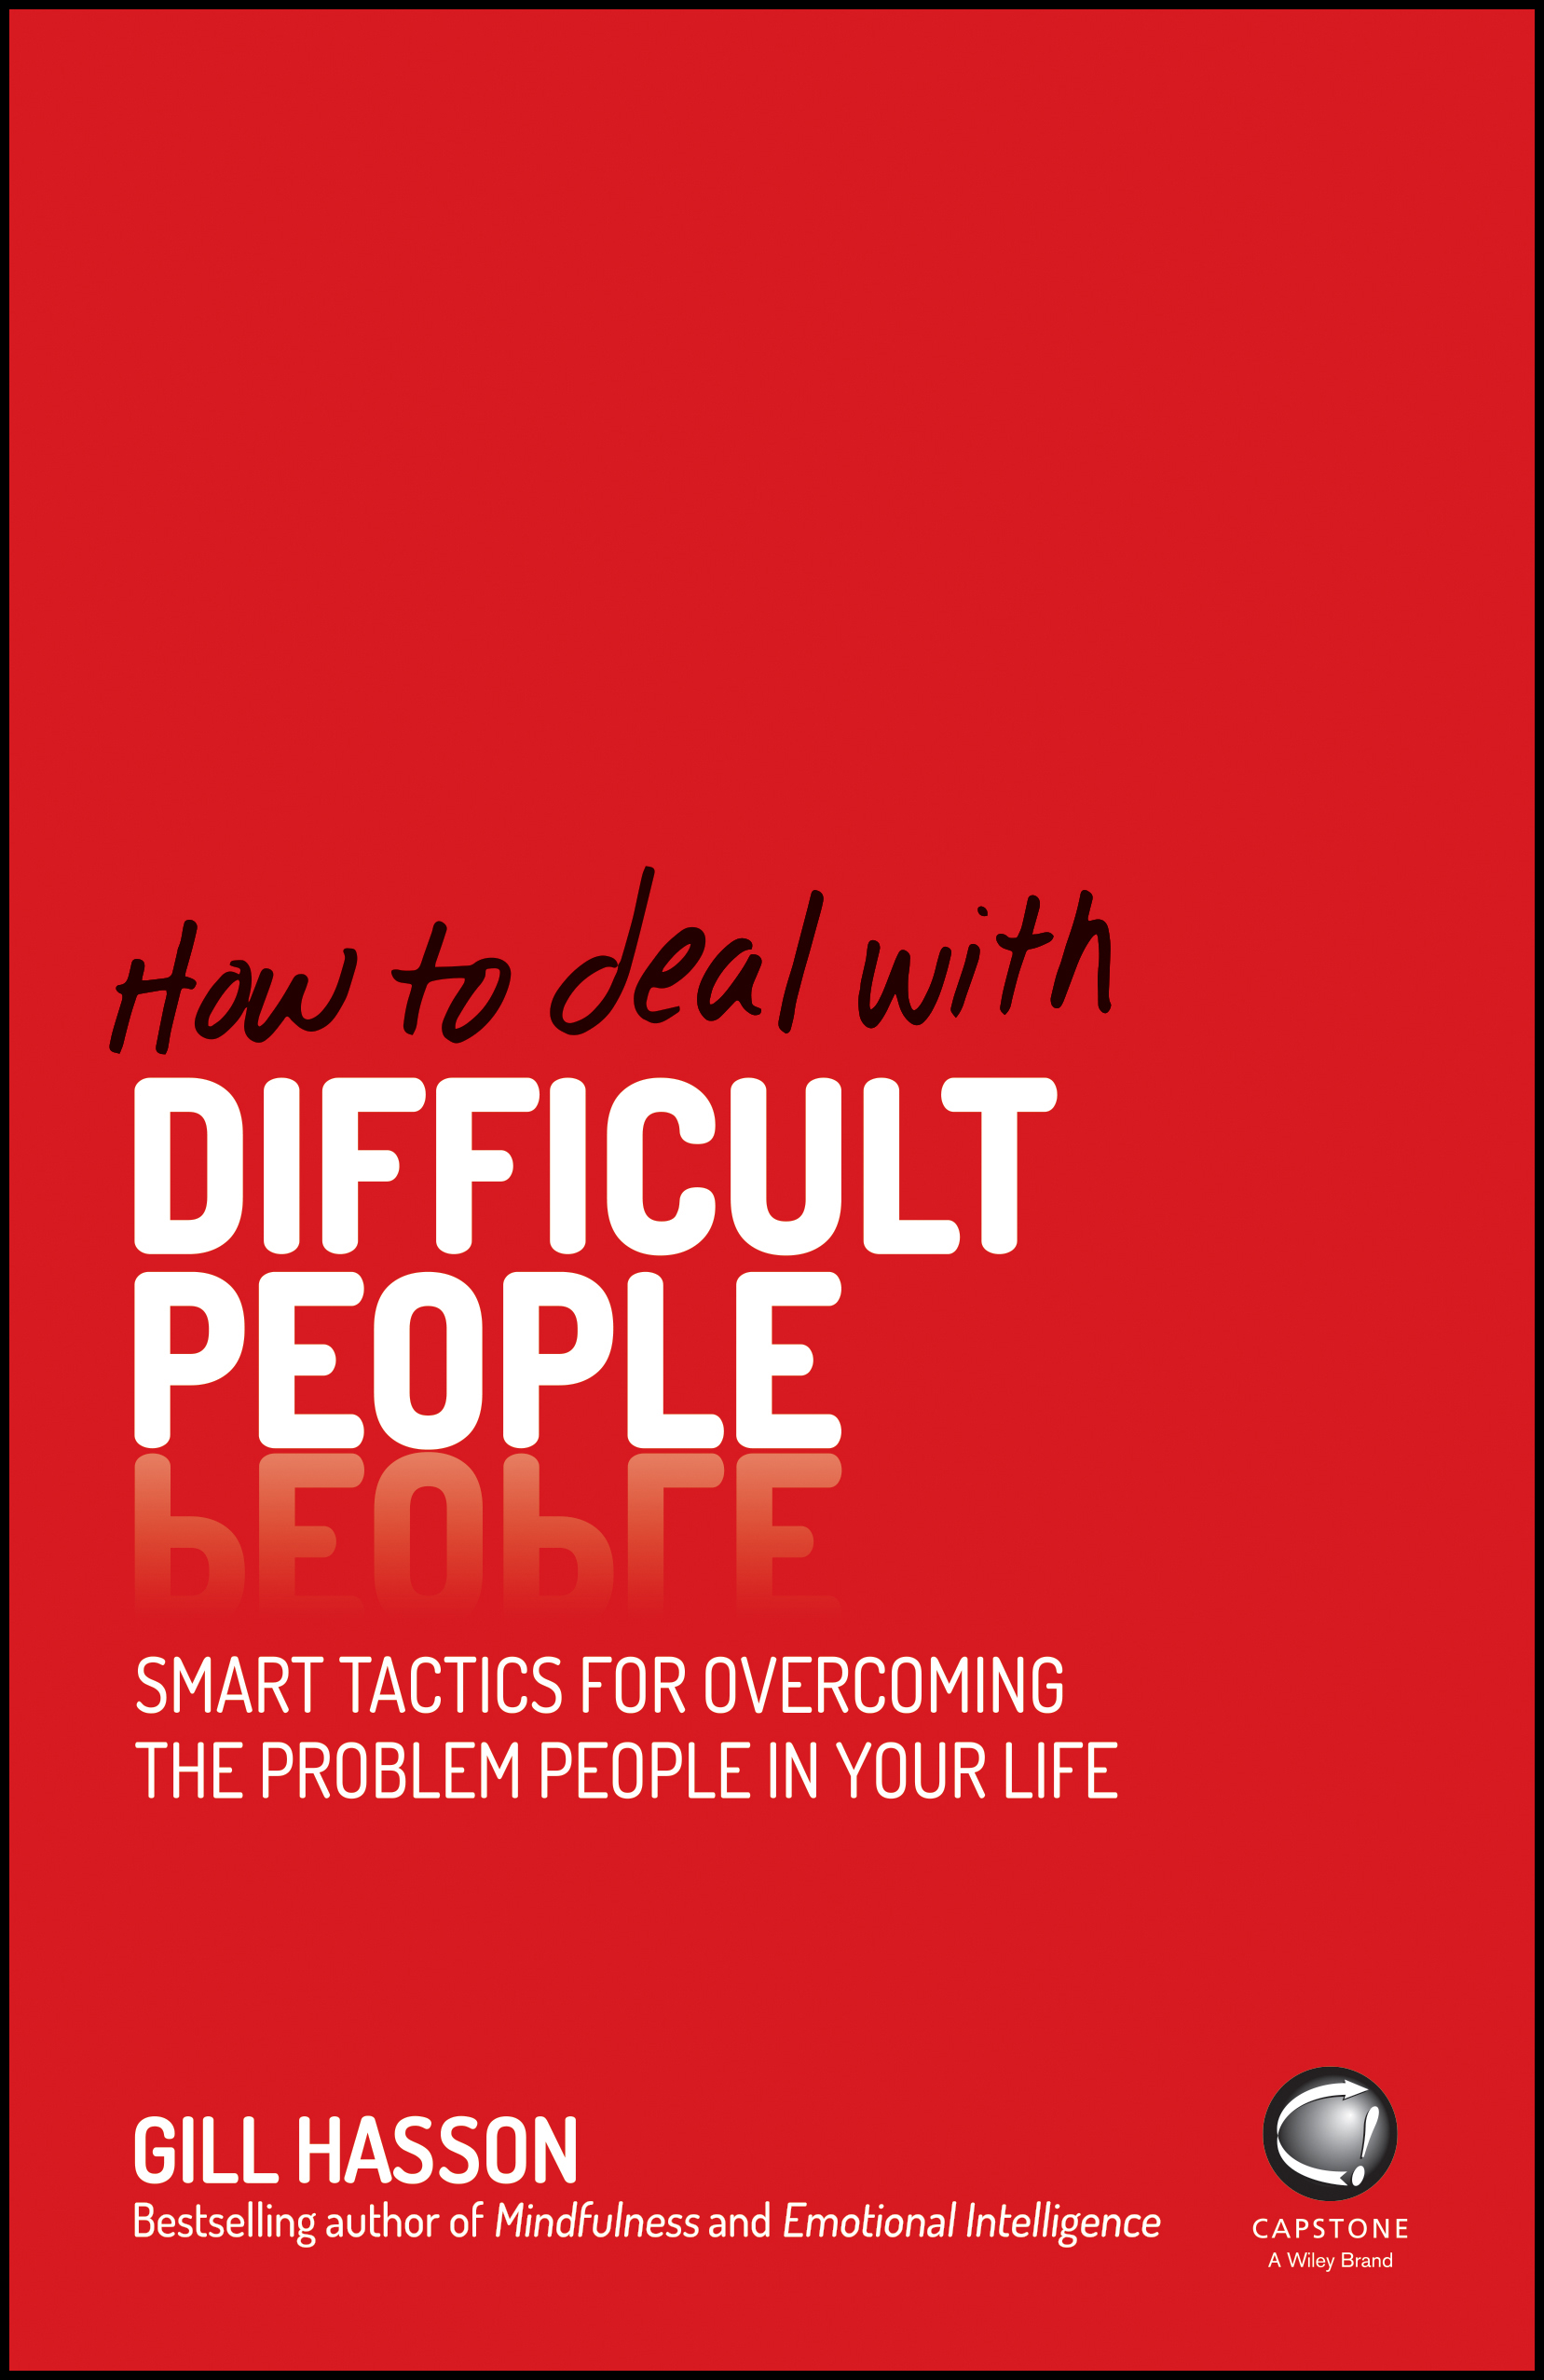 How-to-Deal-With-Difficult-People--Smart-Tactics-for-Overcoming-the-Problem-People-in-Your-Life